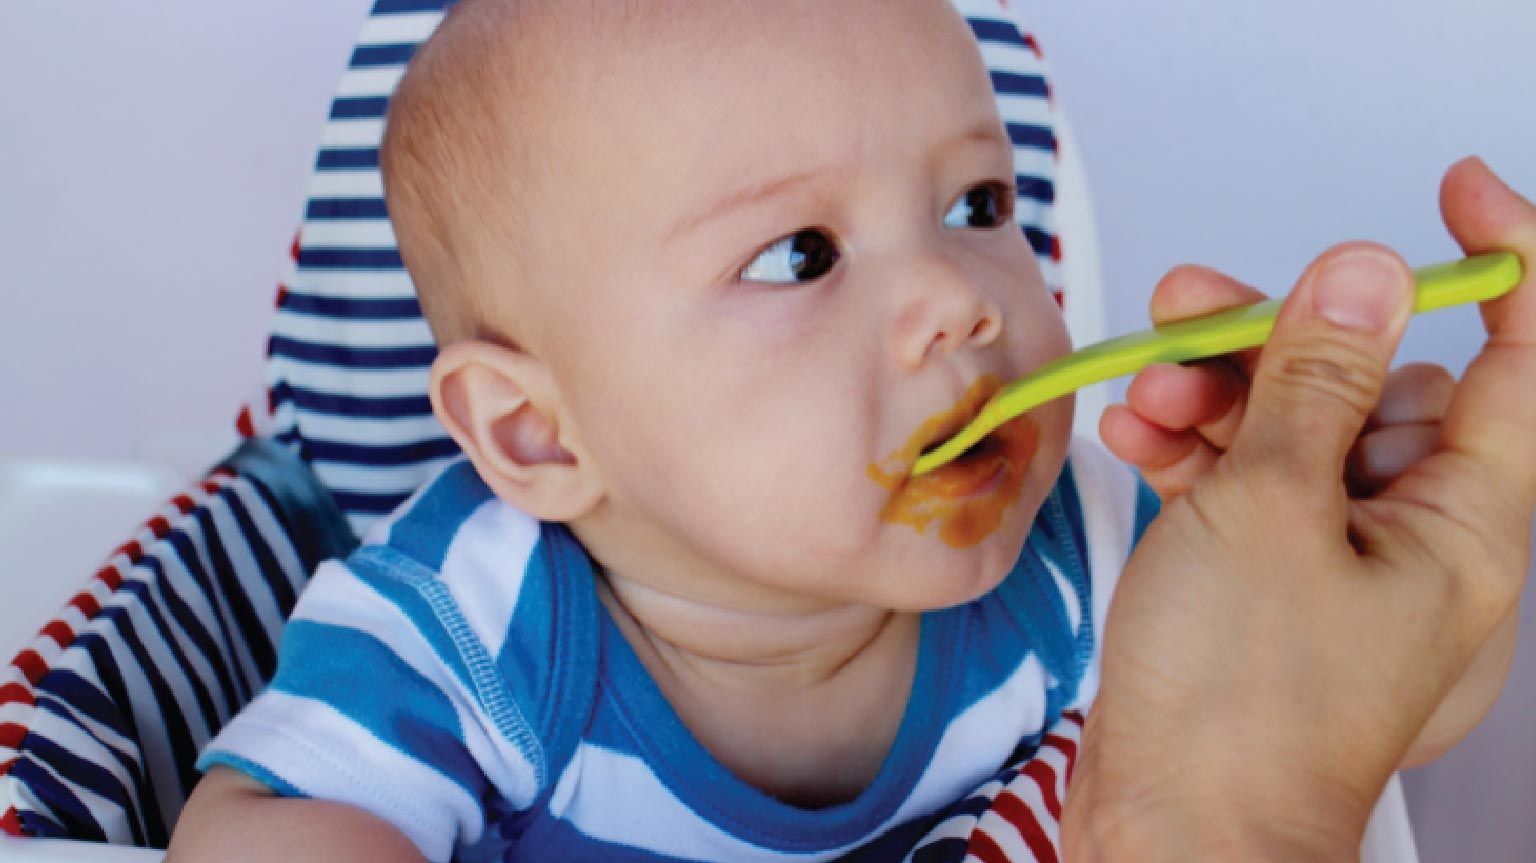 6 month baby food, six month baby food